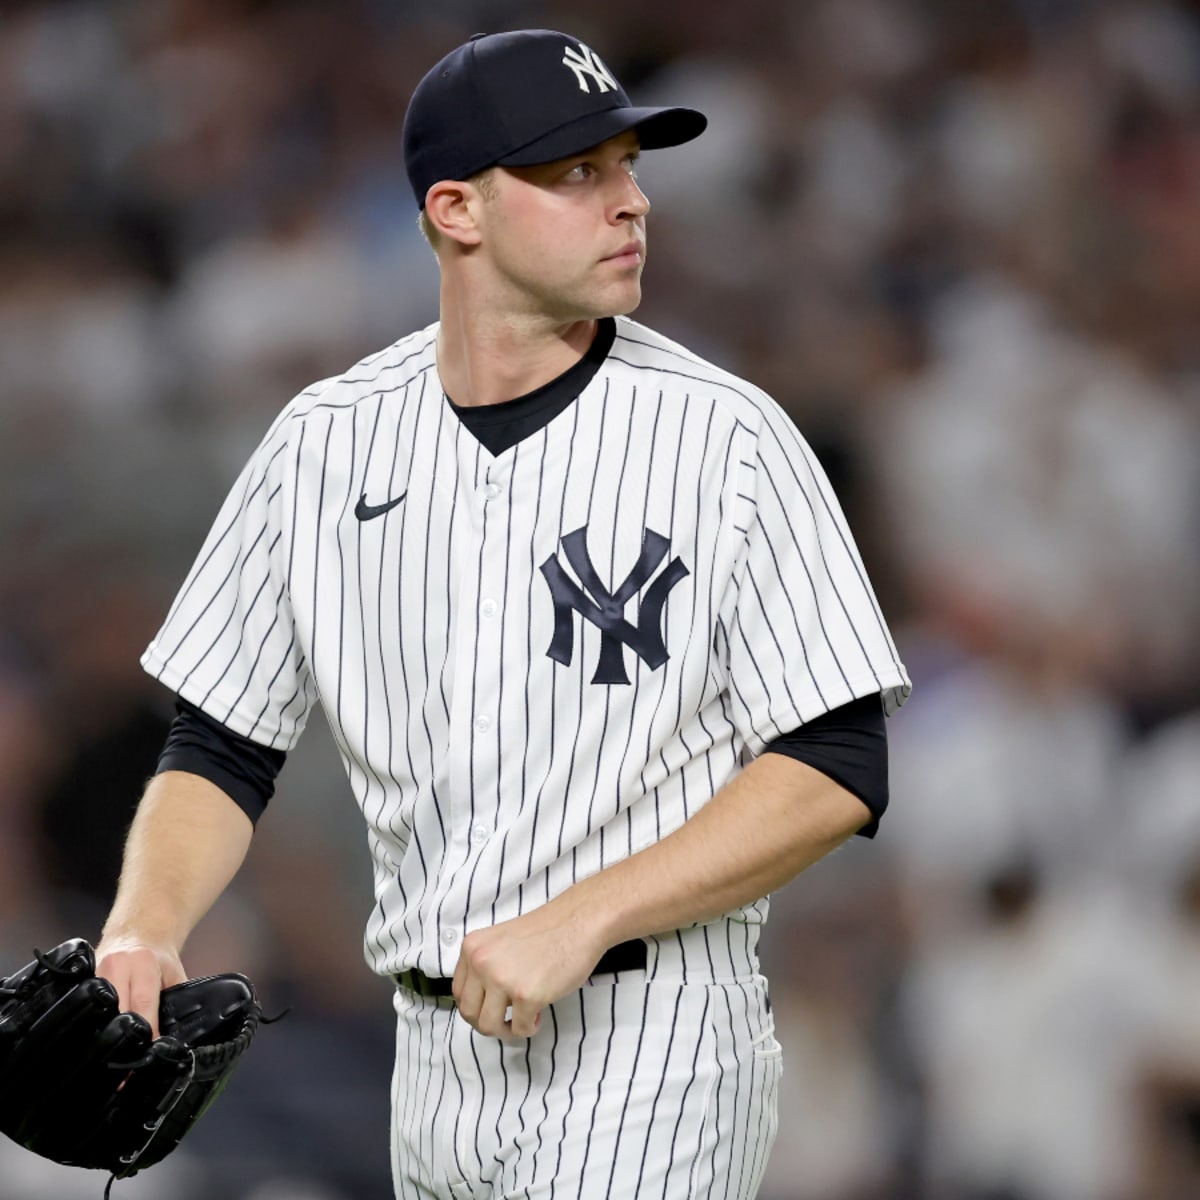 Yankees reliever Michael King comes up big in new role